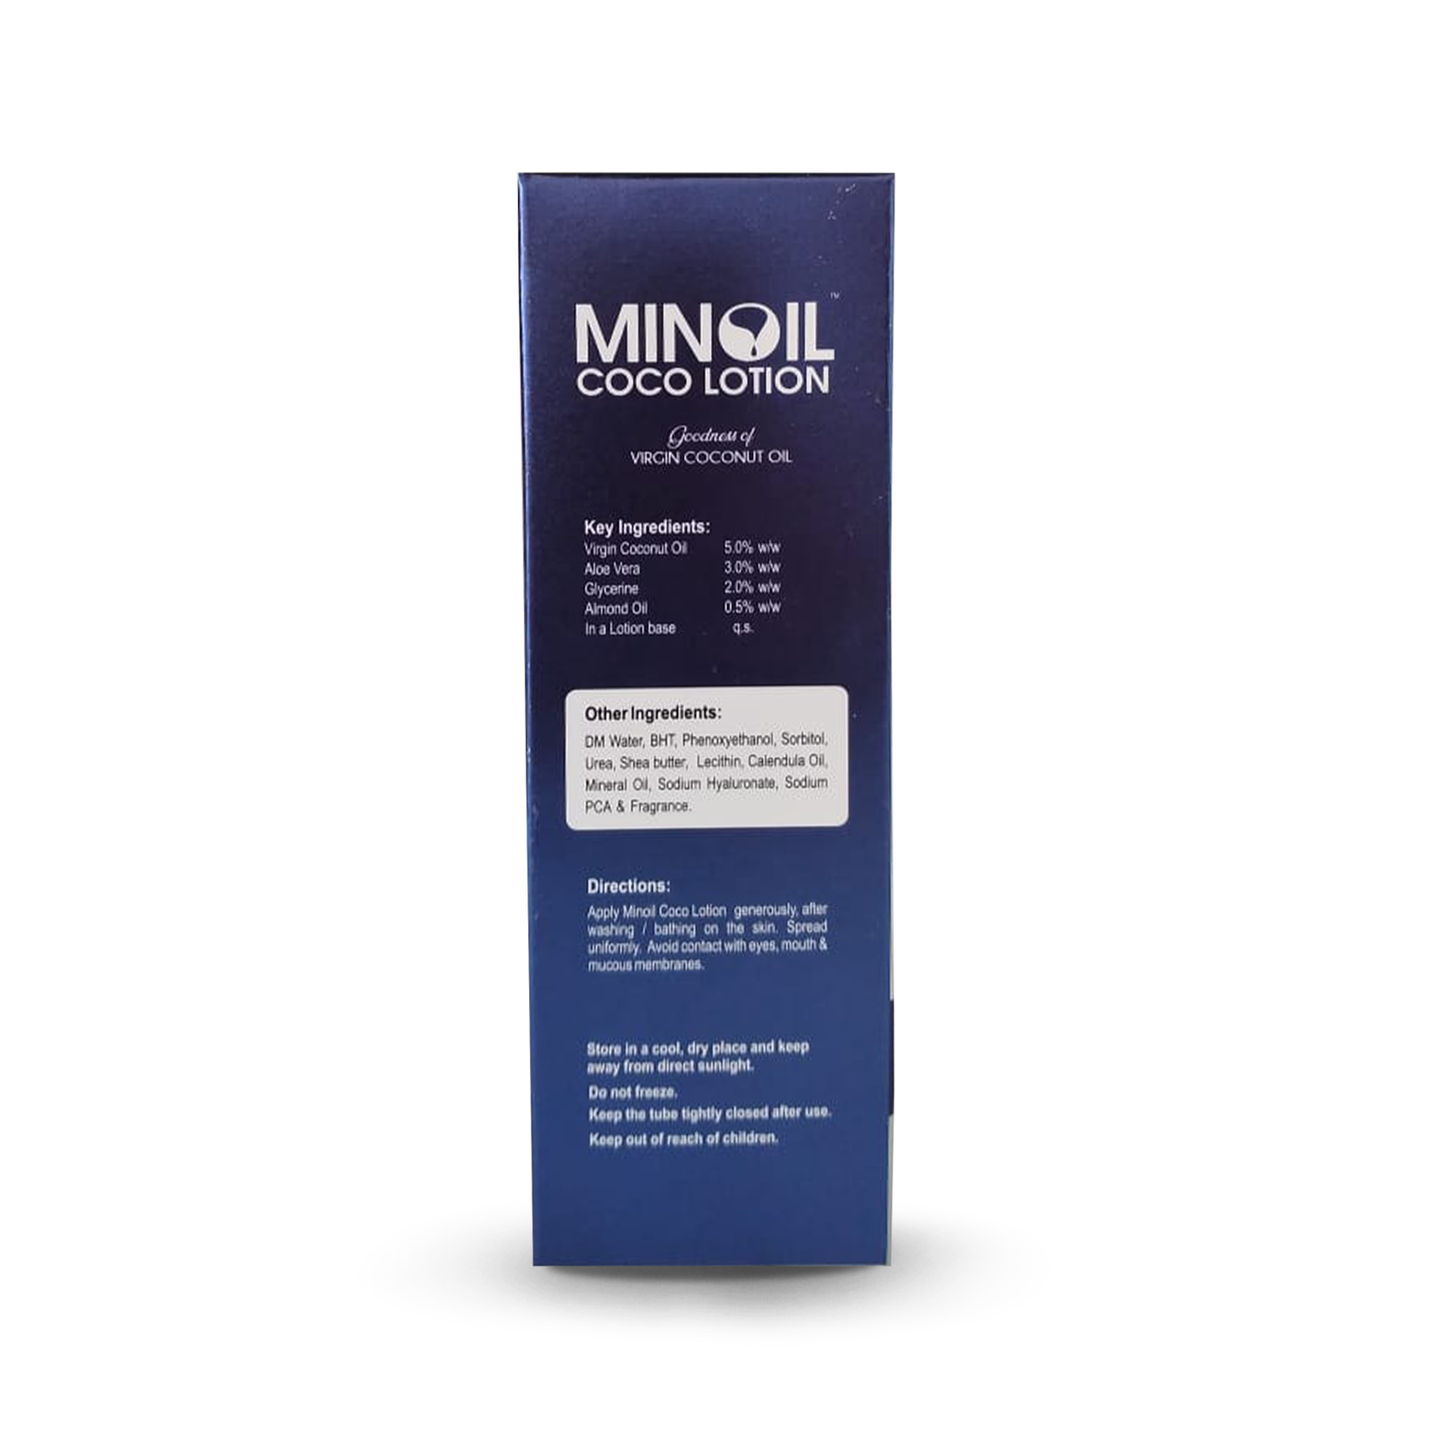 Minoil Coco Lotion, 100gm (Rs. 3.9/gm)